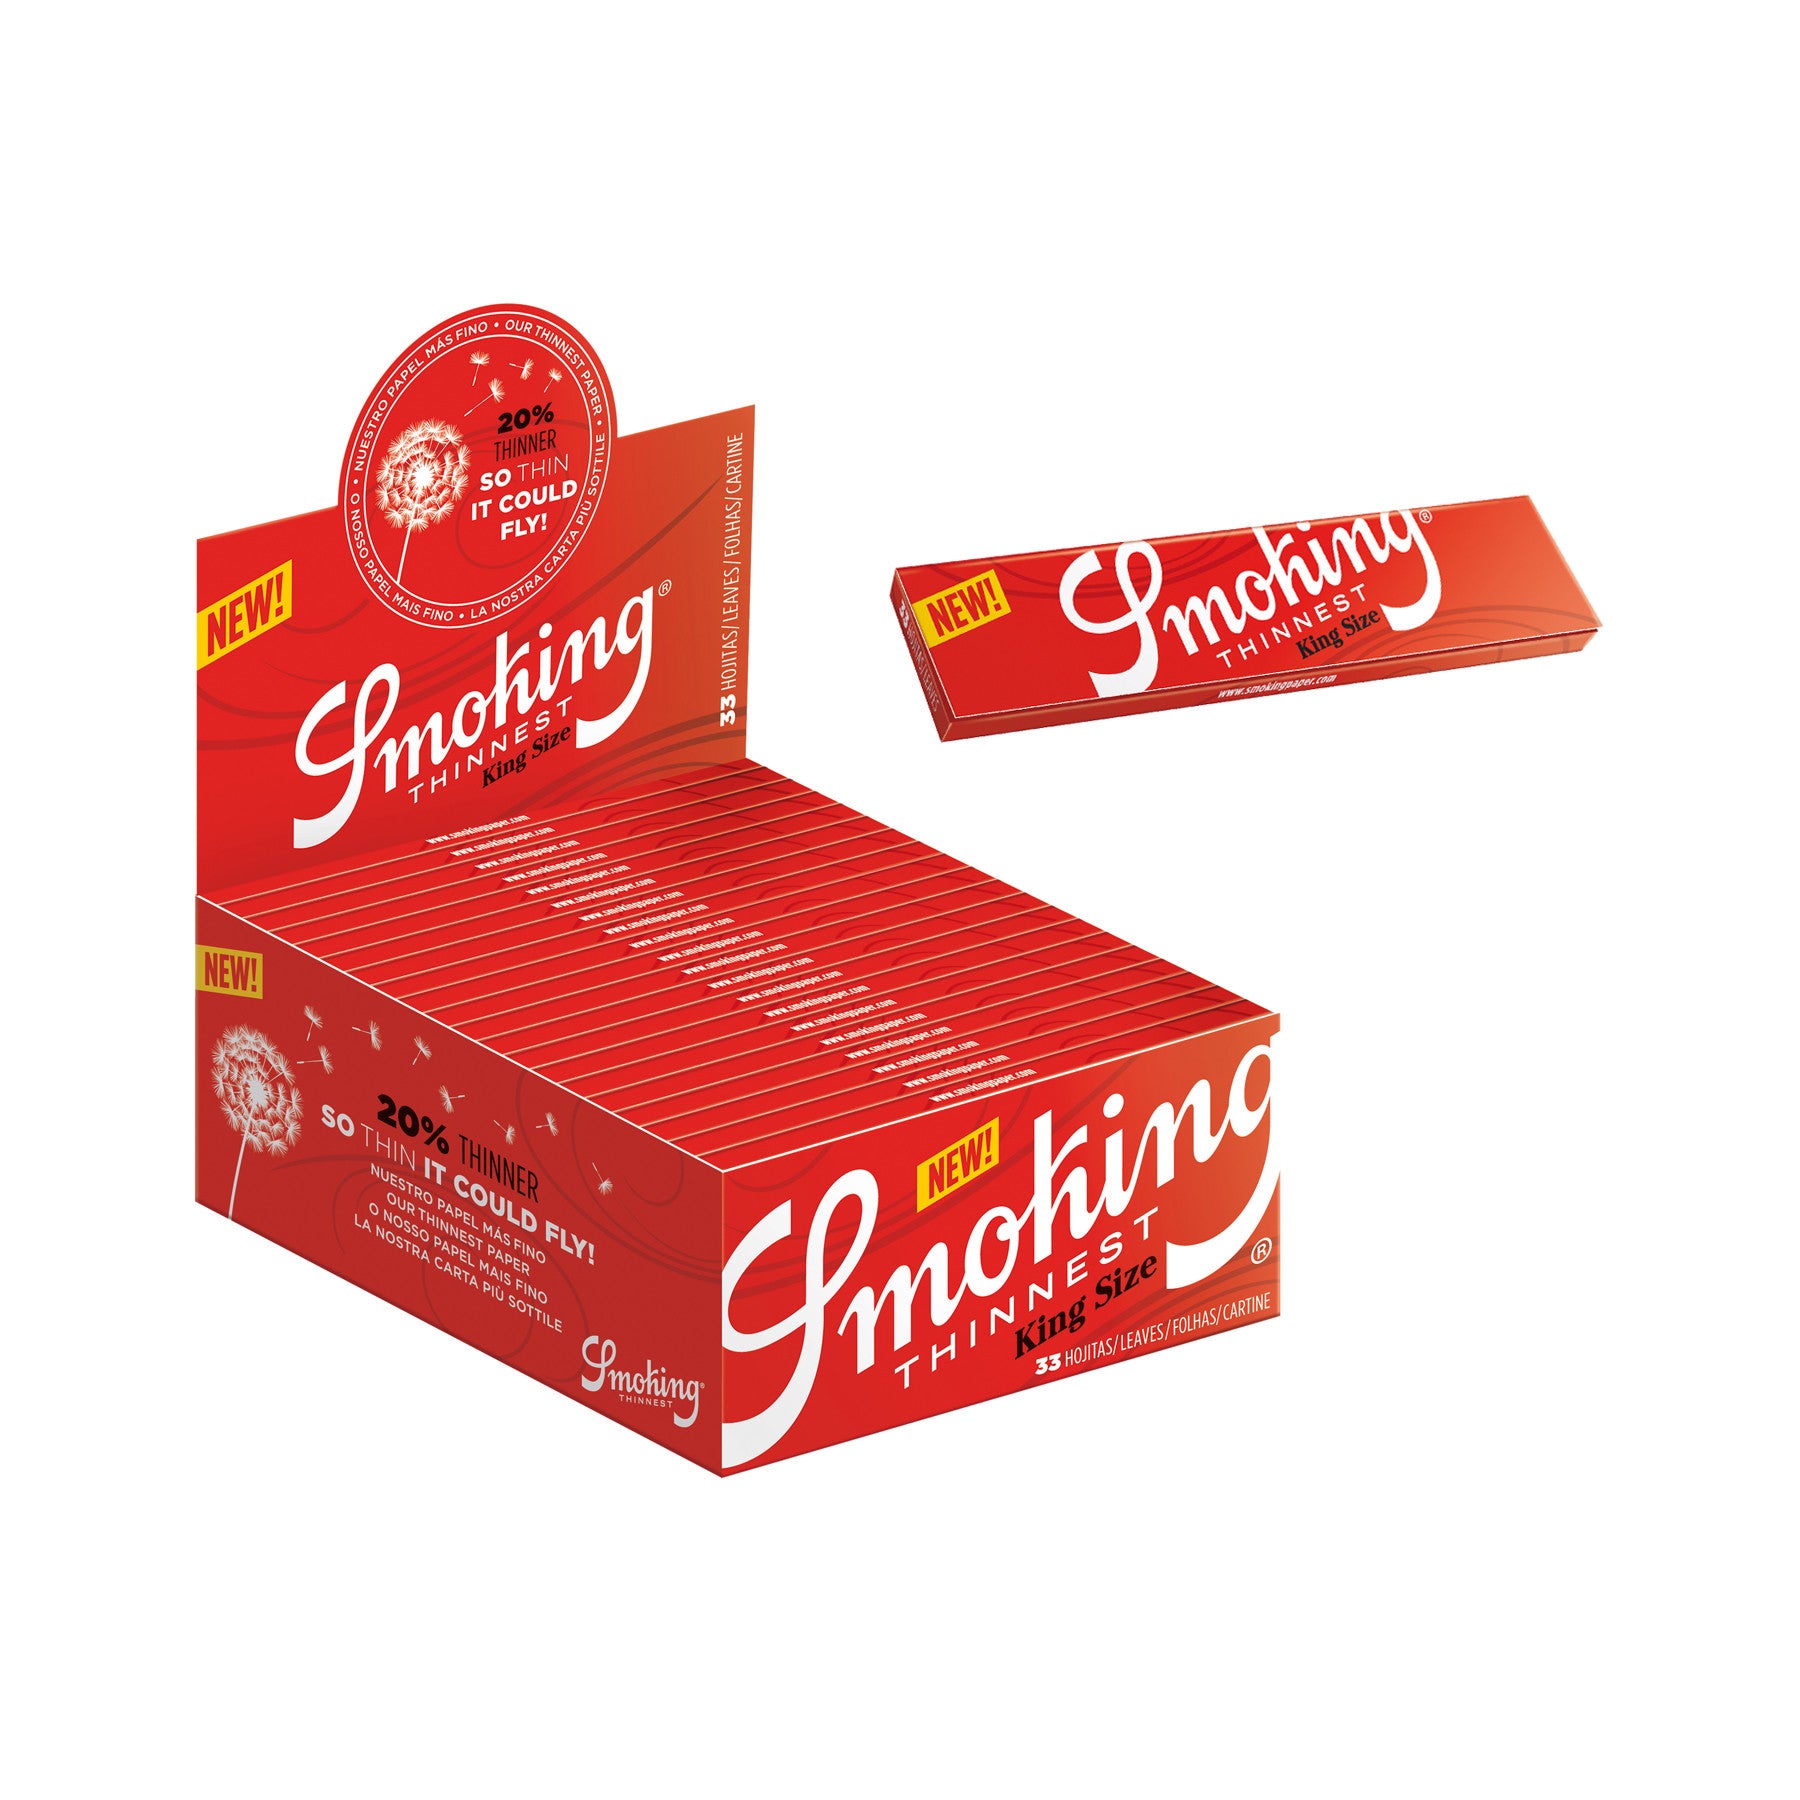 Smoking Thinnest King Size – Roll-Your-Own